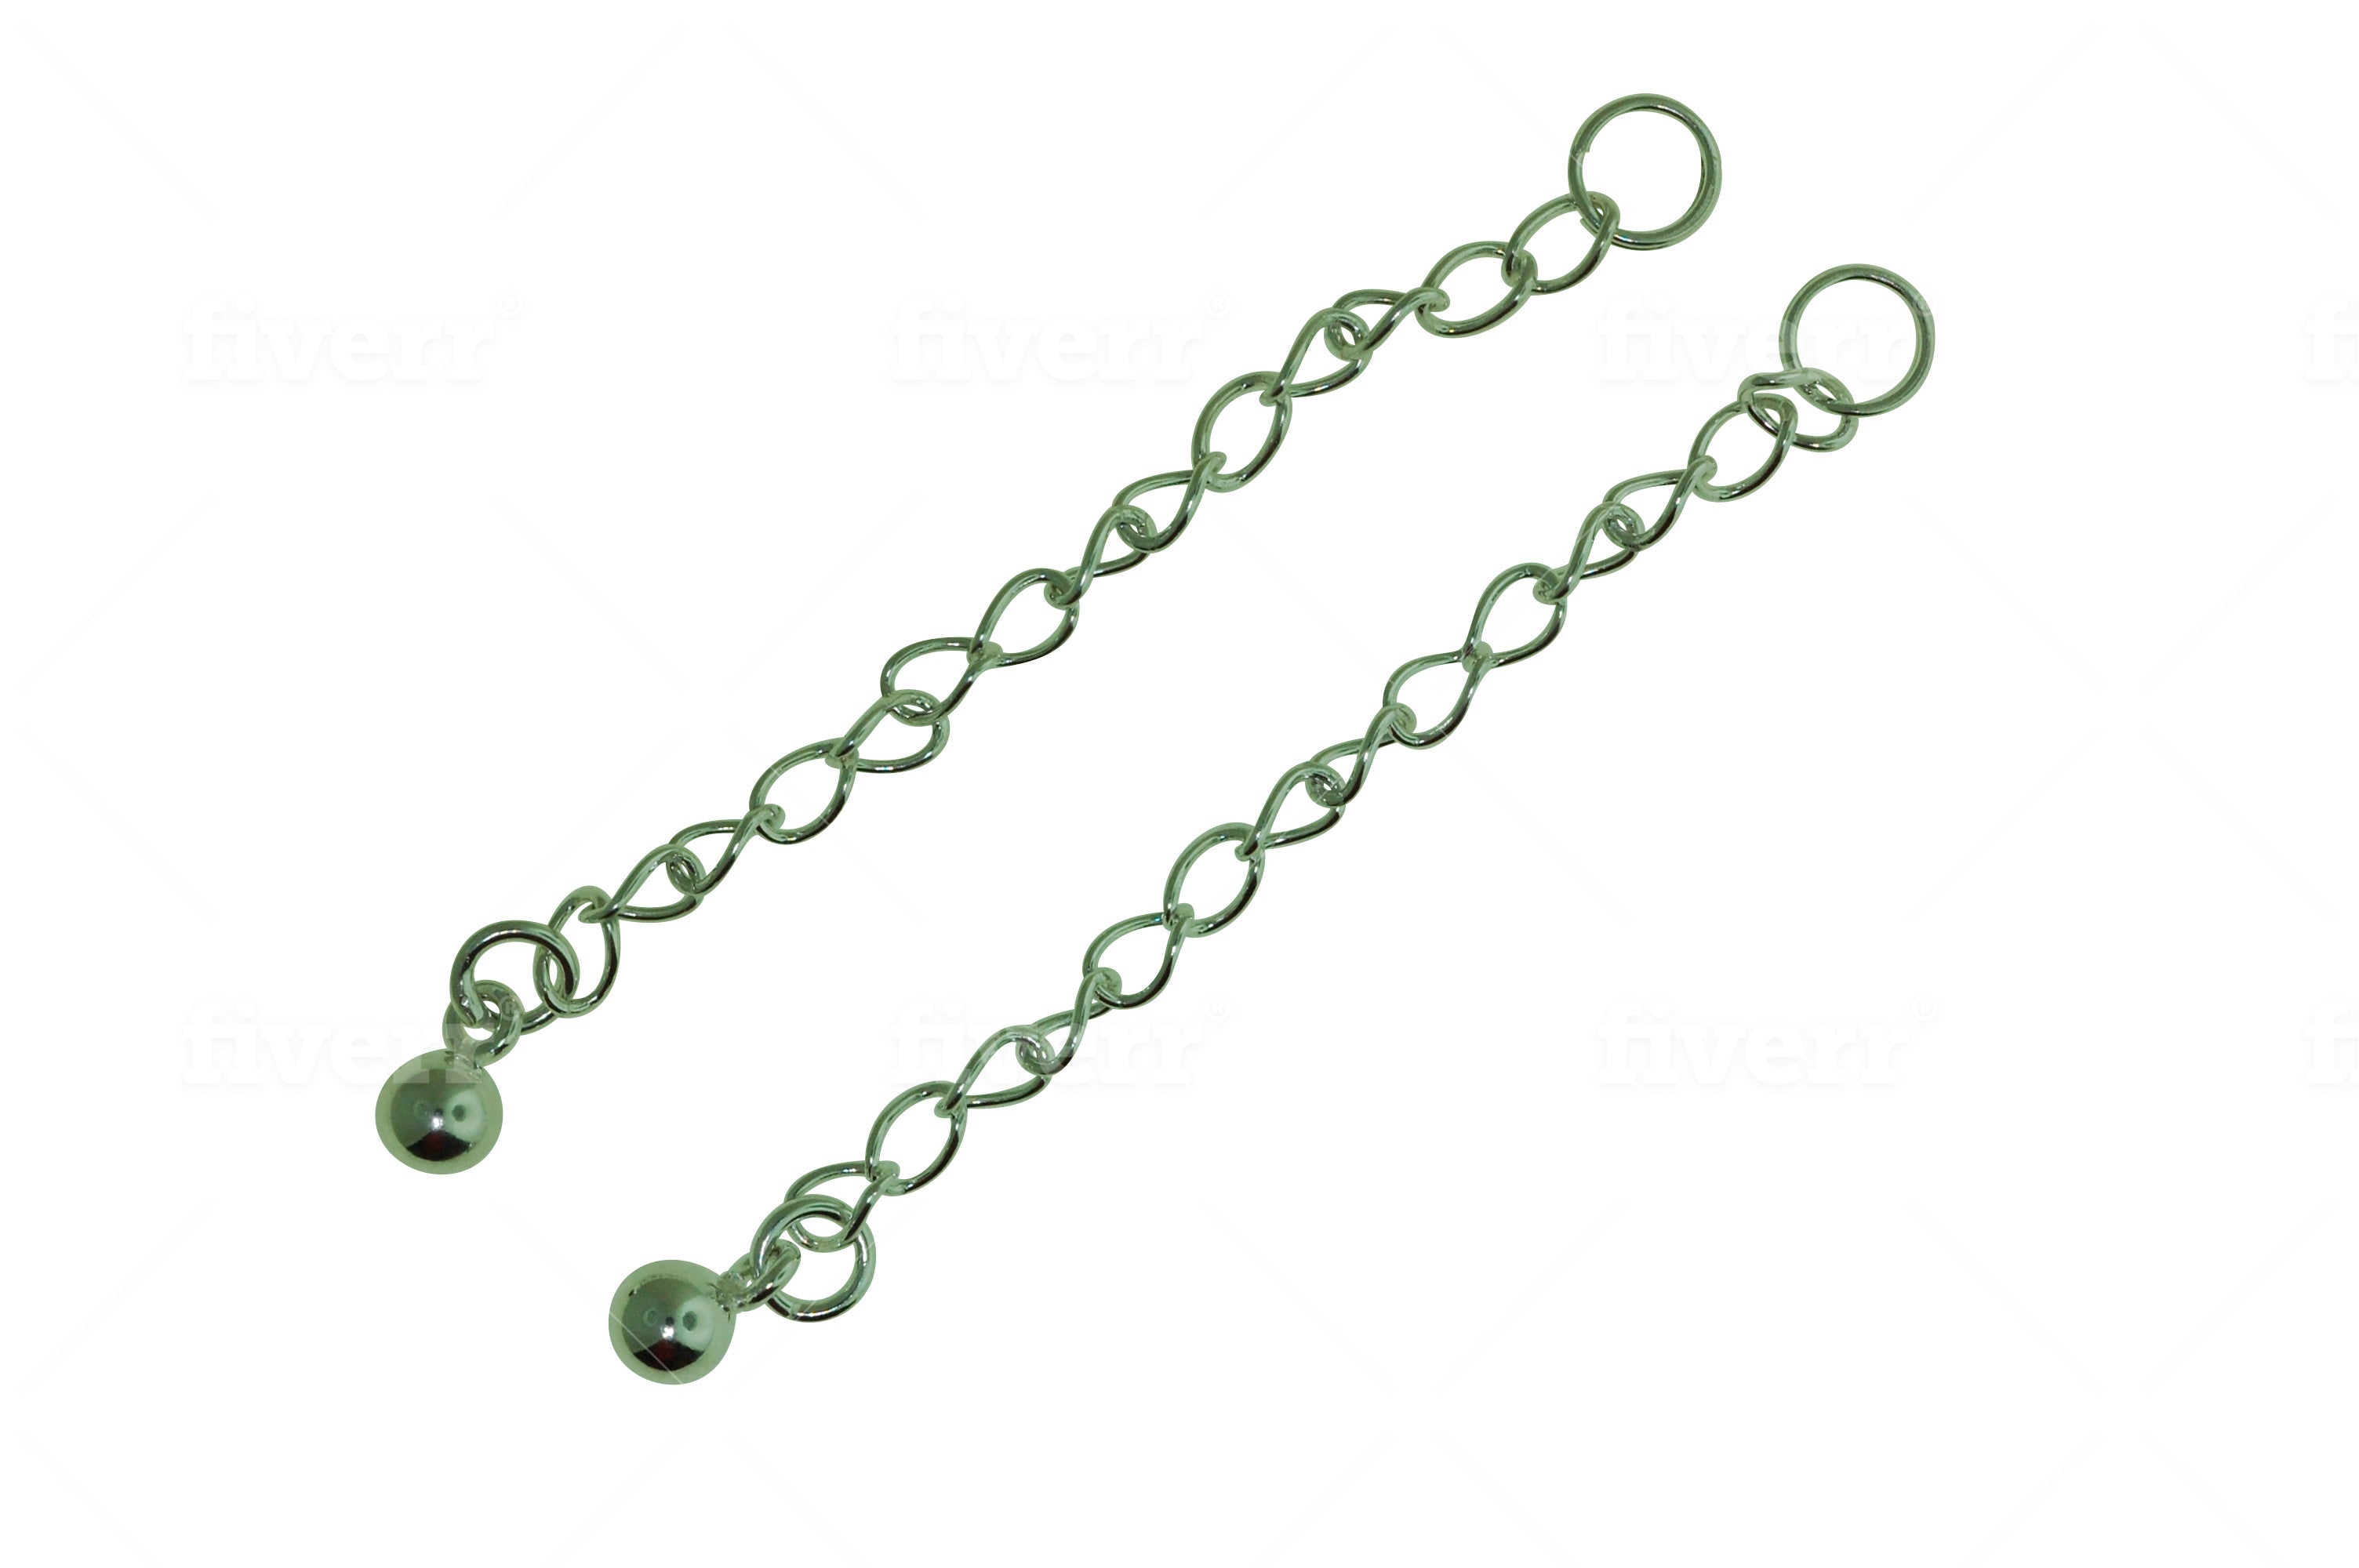 Sterling Silver Extension Chain 2 inches 5 or 10 Pcs